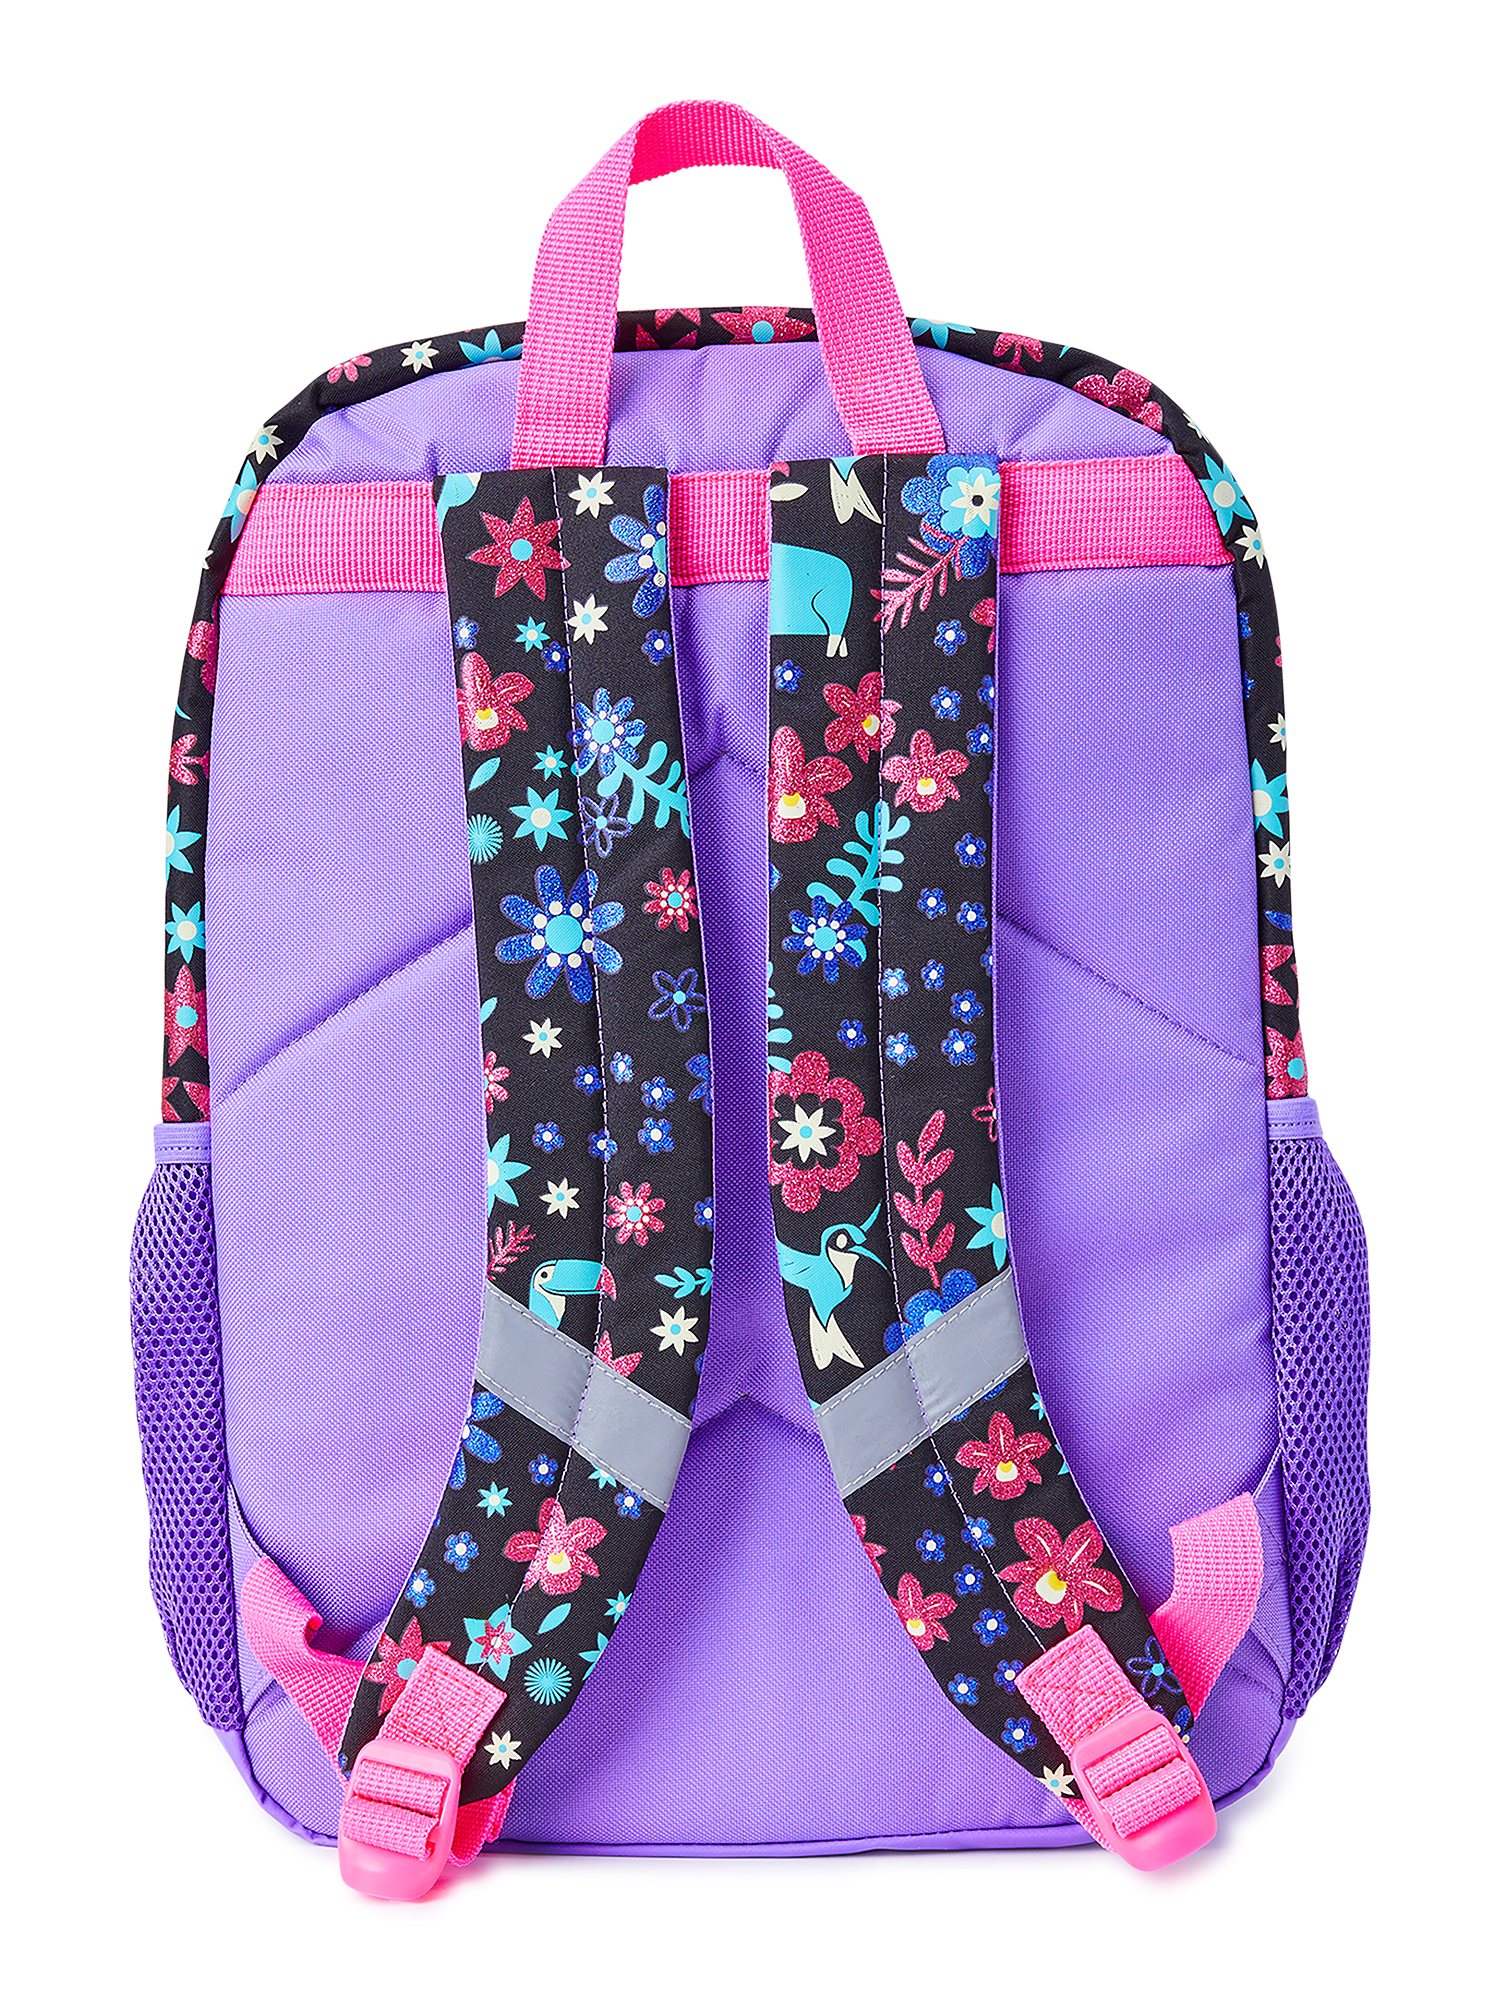 Disney Encanto Magic Family Girls 17" Laptop Backpack 2-Piece Set with Lunch Tote Bag, Purple Pink - image 2 of 5